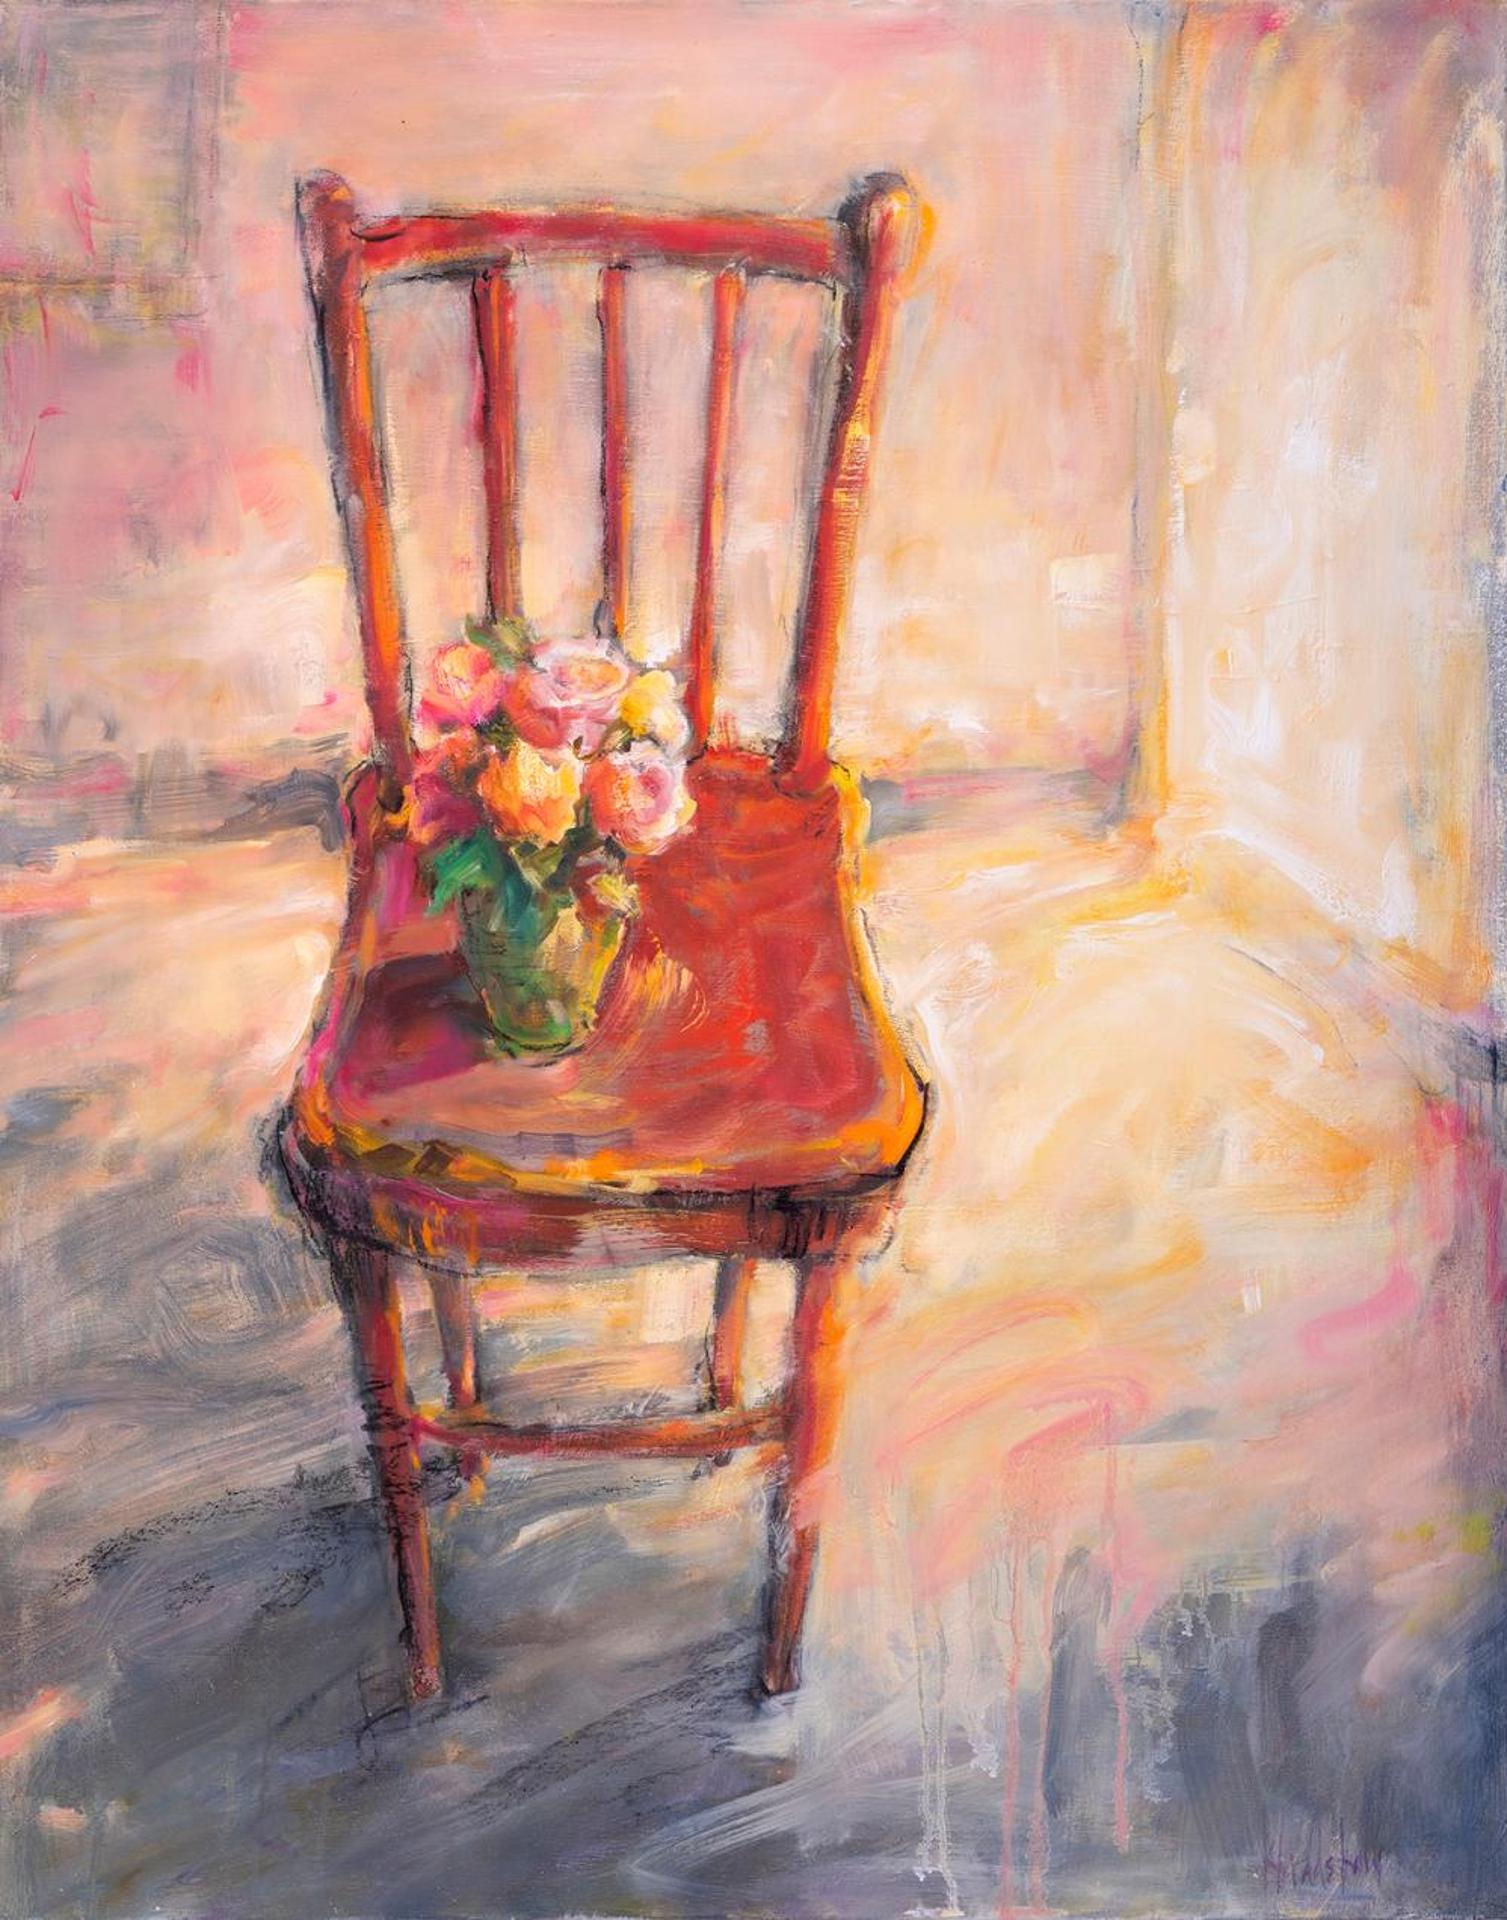 Kathy Bradshaw (1961) - Roses on Red Chair II